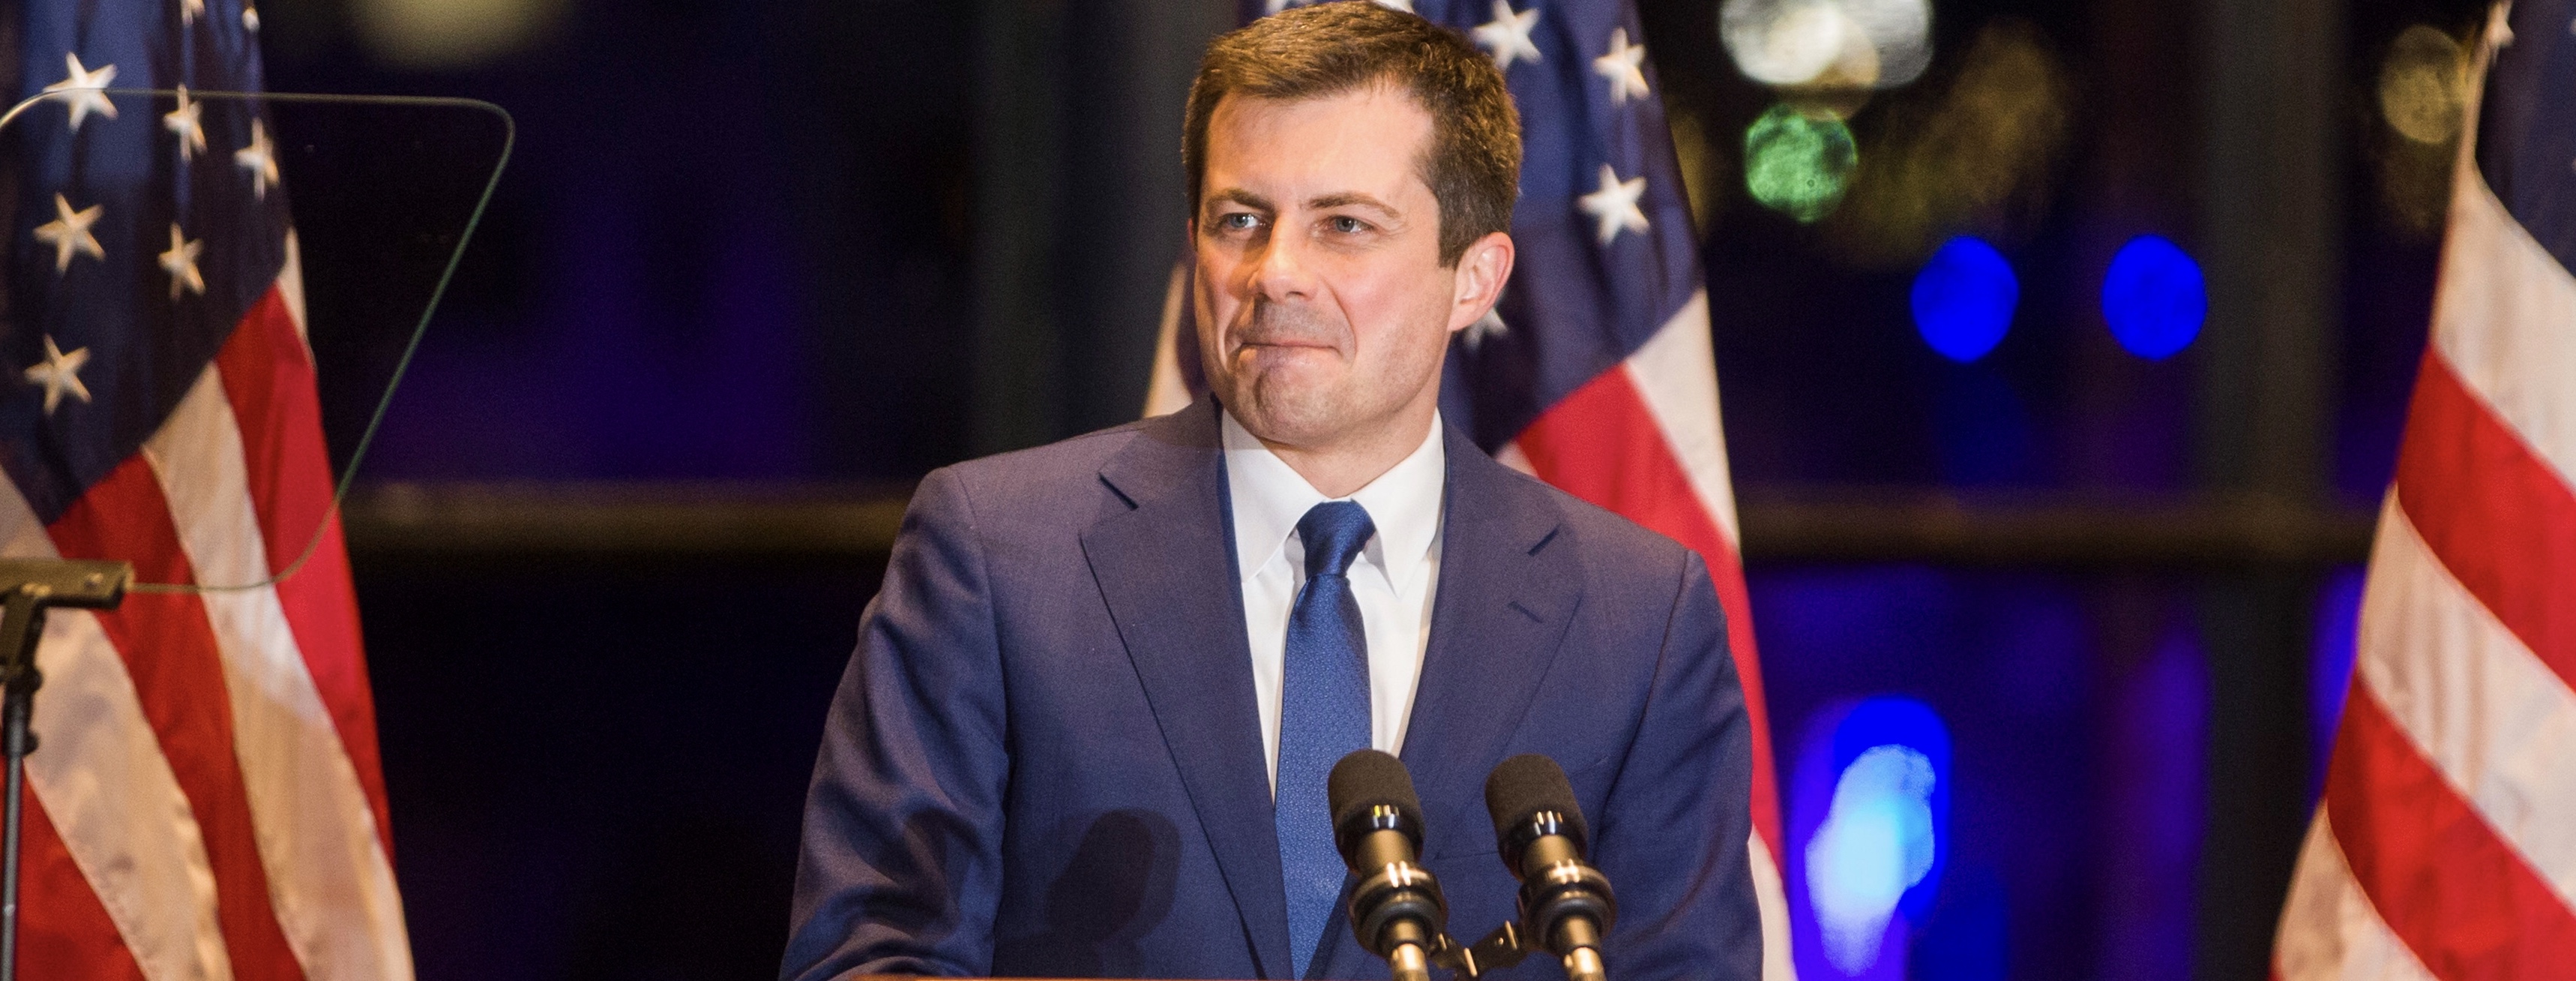 Democratic U.S. presidential candidate Pete Buttigieg announces his withdrawal from the race for the 2020 Democratic presidential nomination during an event in South Bend, Indiana, U.S., March 1, 2020. Mandatory Credit: Santiago Flores/South Bend Tribune via USA TODAY NETWORK via REUTERS